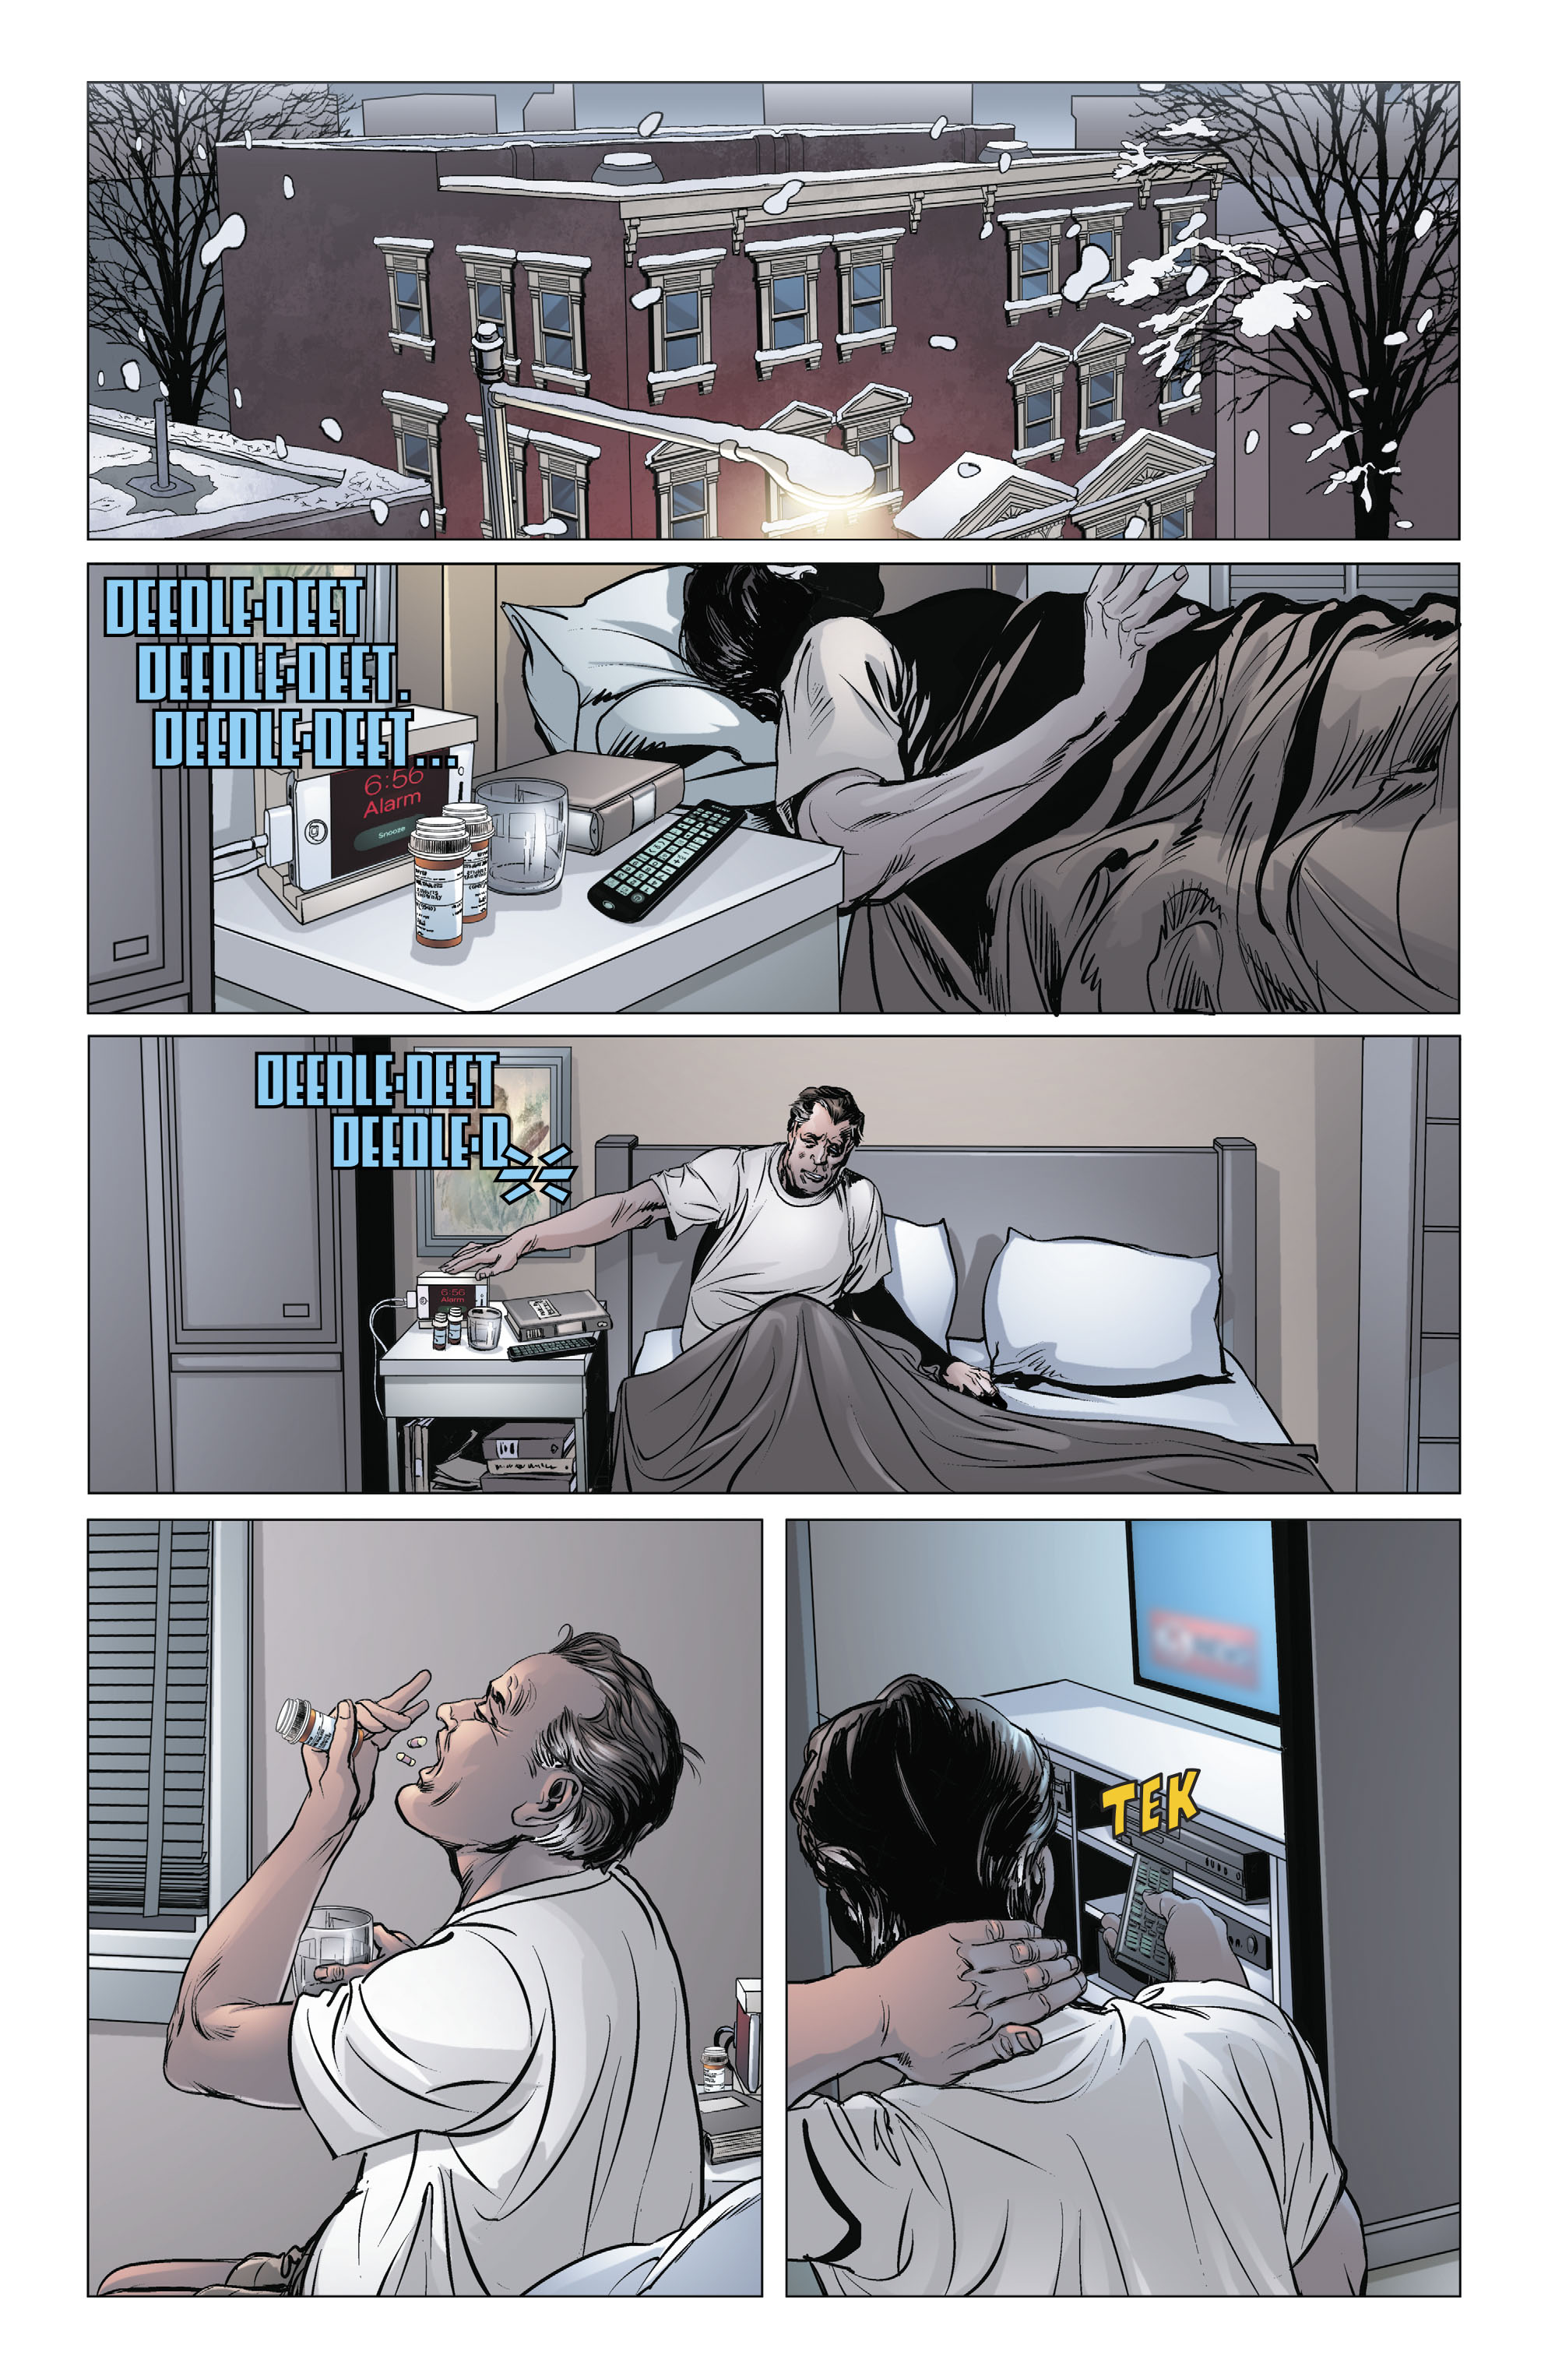 Astro City (2013-): Chapter 50 - Page 2